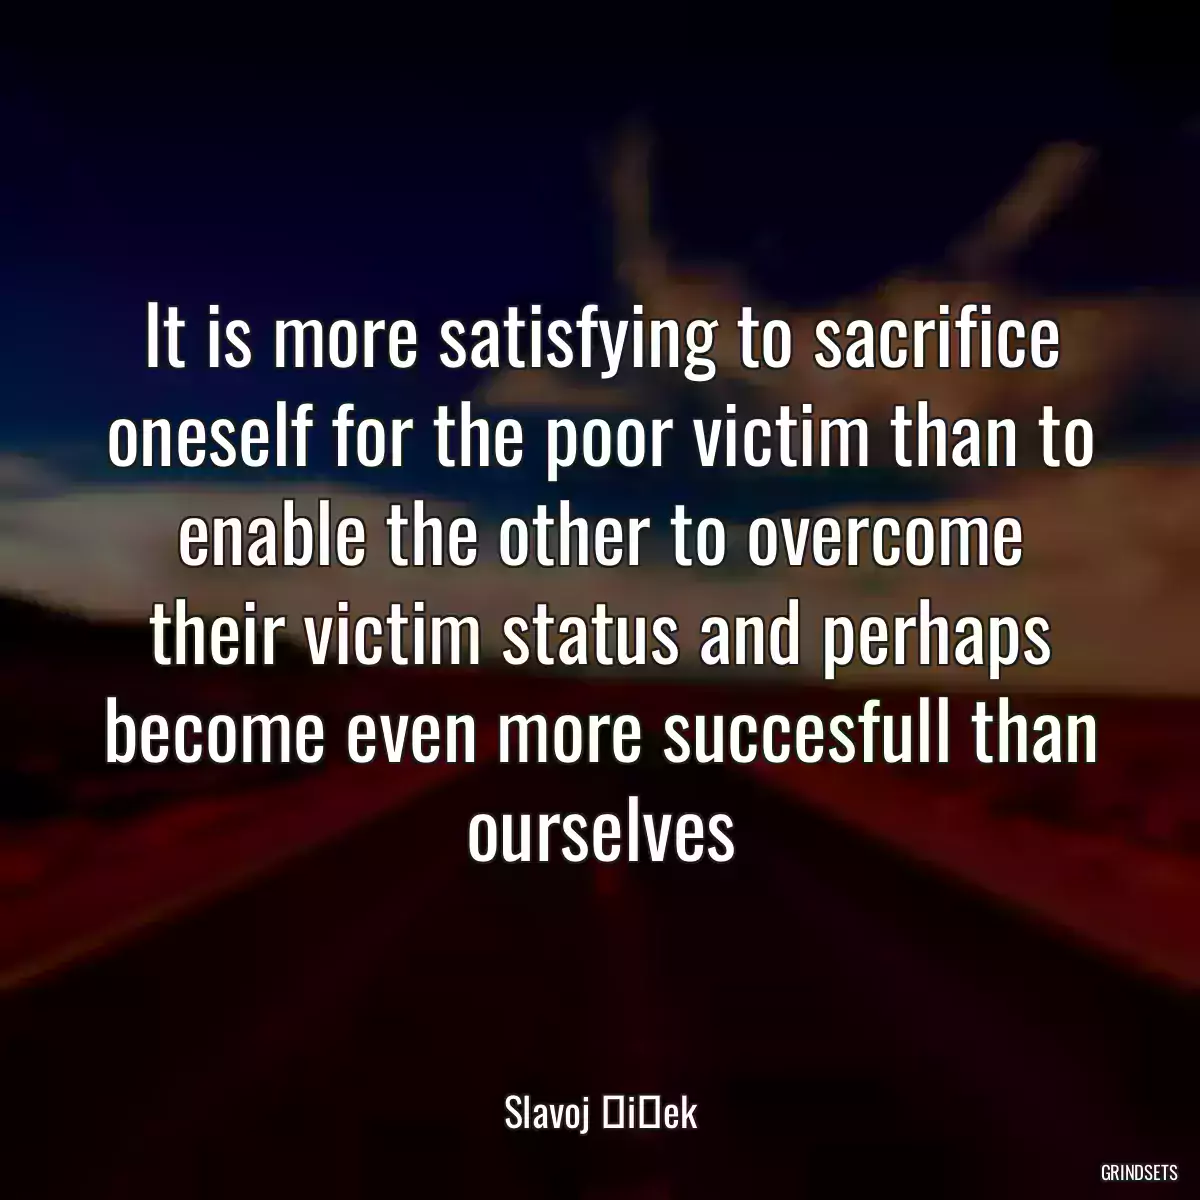 It is more satisfying to sacrifice oneself for the poor victim than to enable the other to overcome their victim status and perhaps become even more succesfull than ourselves